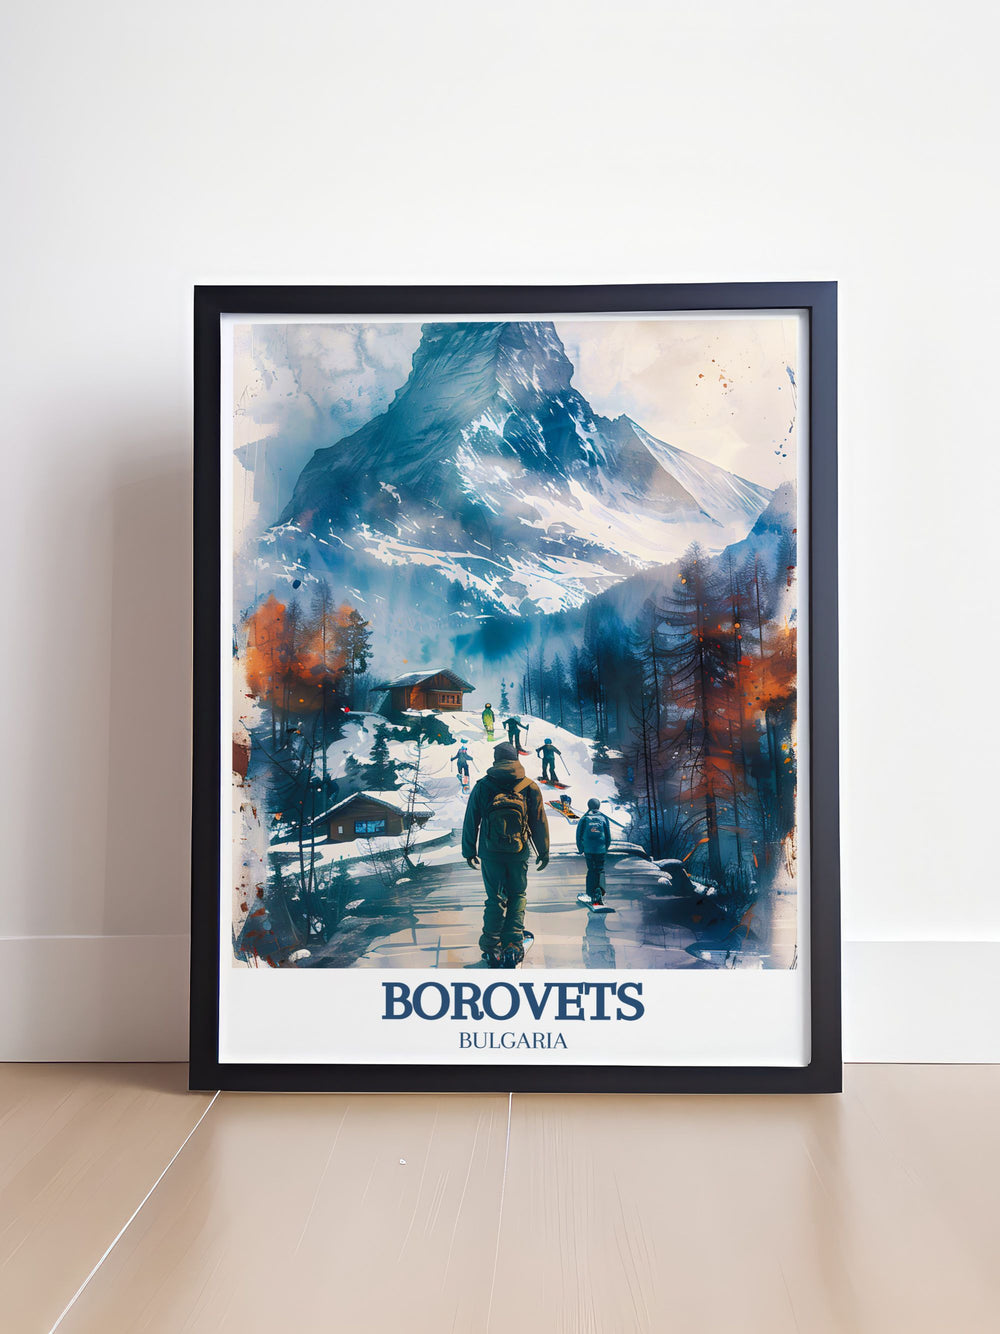 Unique artwork of Borovets featuring its lively resort area and the serene landscapes of the Musala Pathway, perfect for personalized gifts or home decor. This print captures the essence of Bulgarias alpine charm.